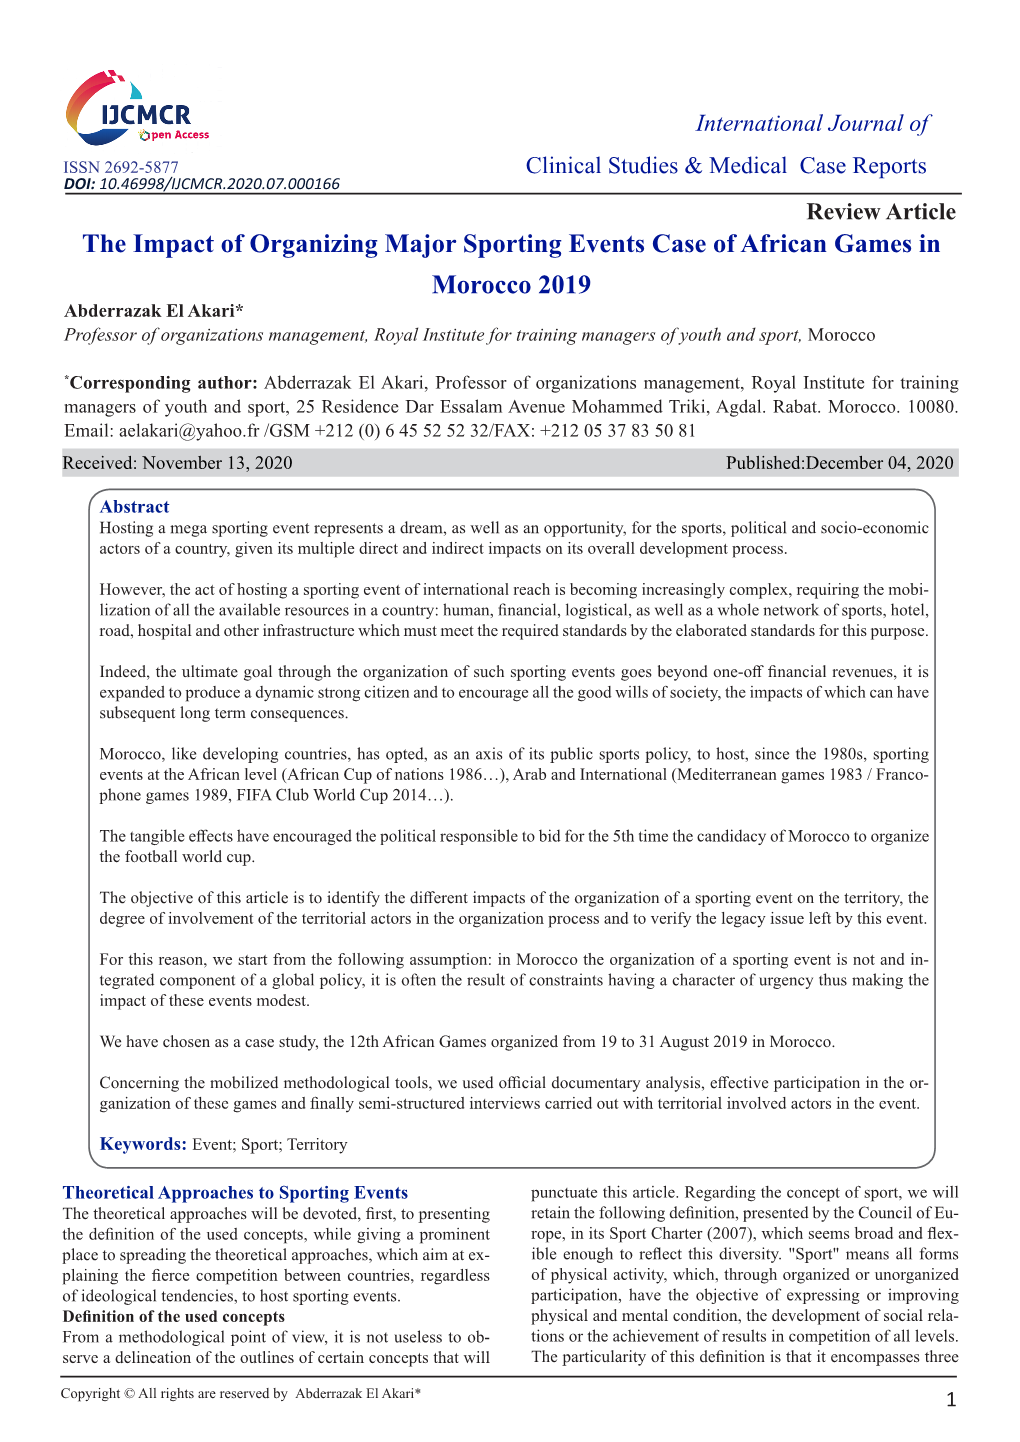 The Impact of Organizing Major Sporting Events Case of African